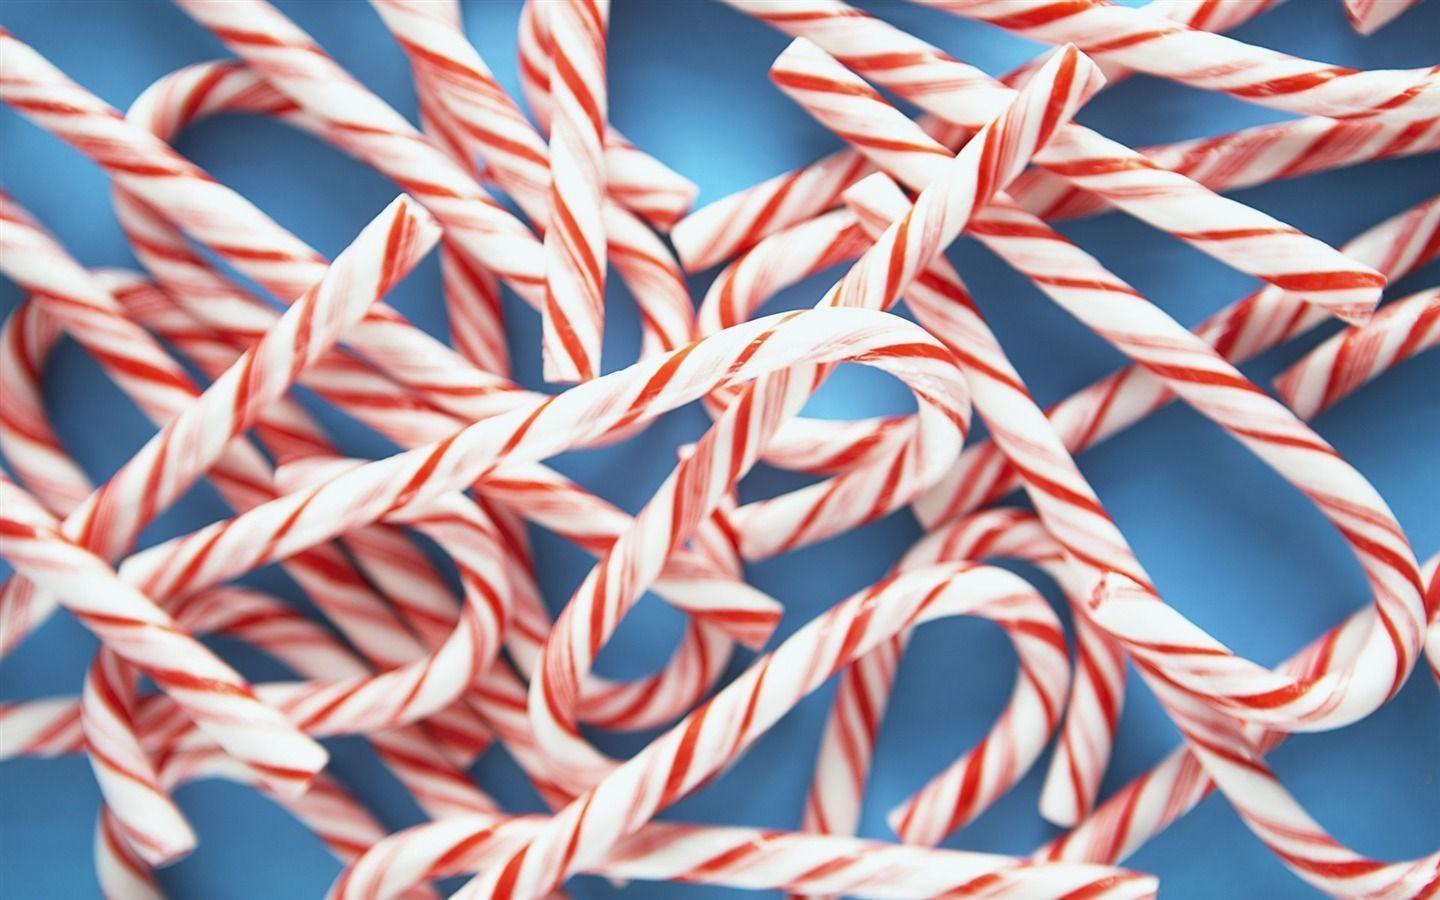 Download Candy Cane Pictures 38139 1440x900 px High Resolution